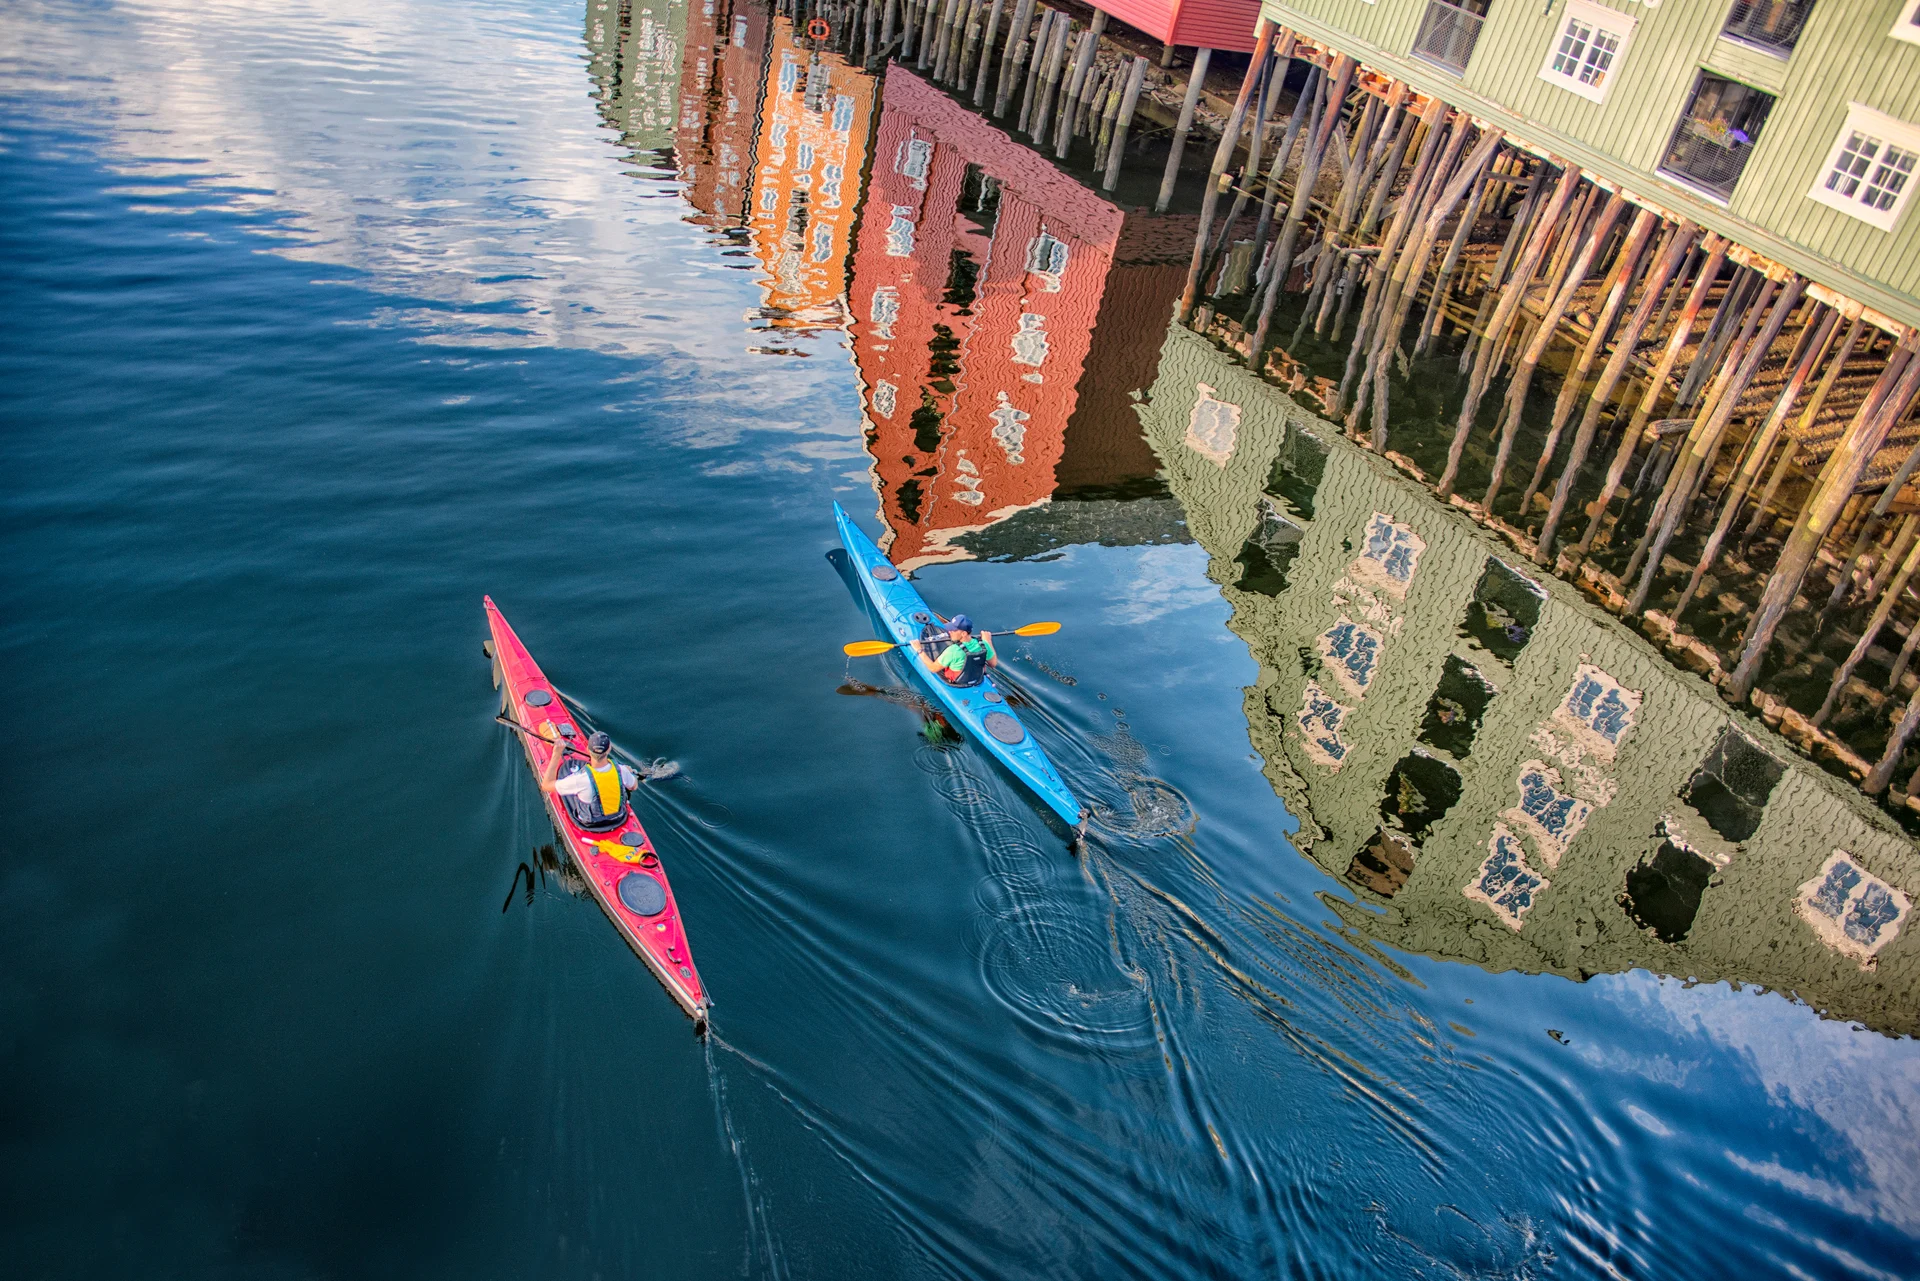 Two kayakers on the River Nid in Trondheim